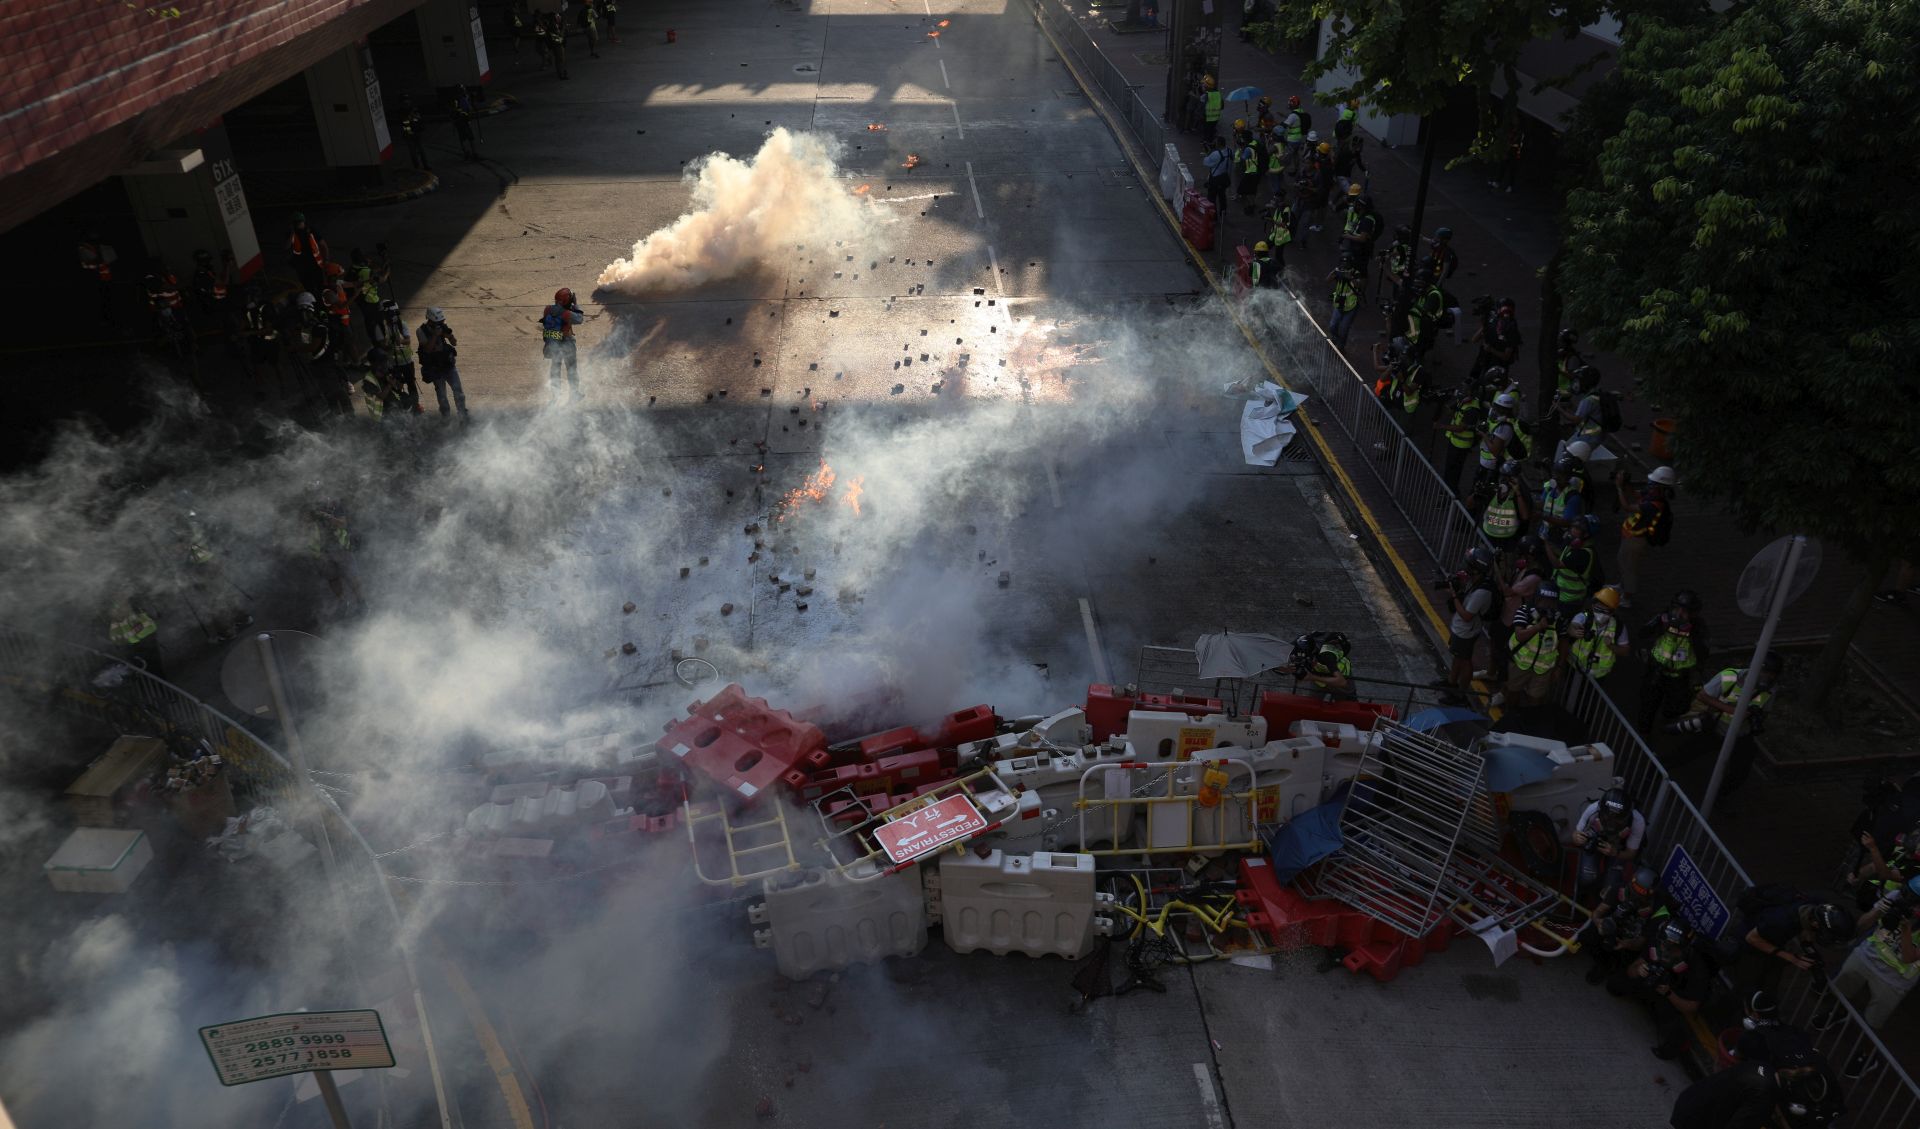 epa07858359 Riot police fire tear gas at protesters during an anti-government rally in Tuen Mun, Hong Kong, China, 21 September 2019. Hong Kong has entered its fourth month of mass protests, originally triggered by a now suspended extradition bill to mainland China that have turned into a wider pro-democracy movement.  EPA/JEROME FAVRE